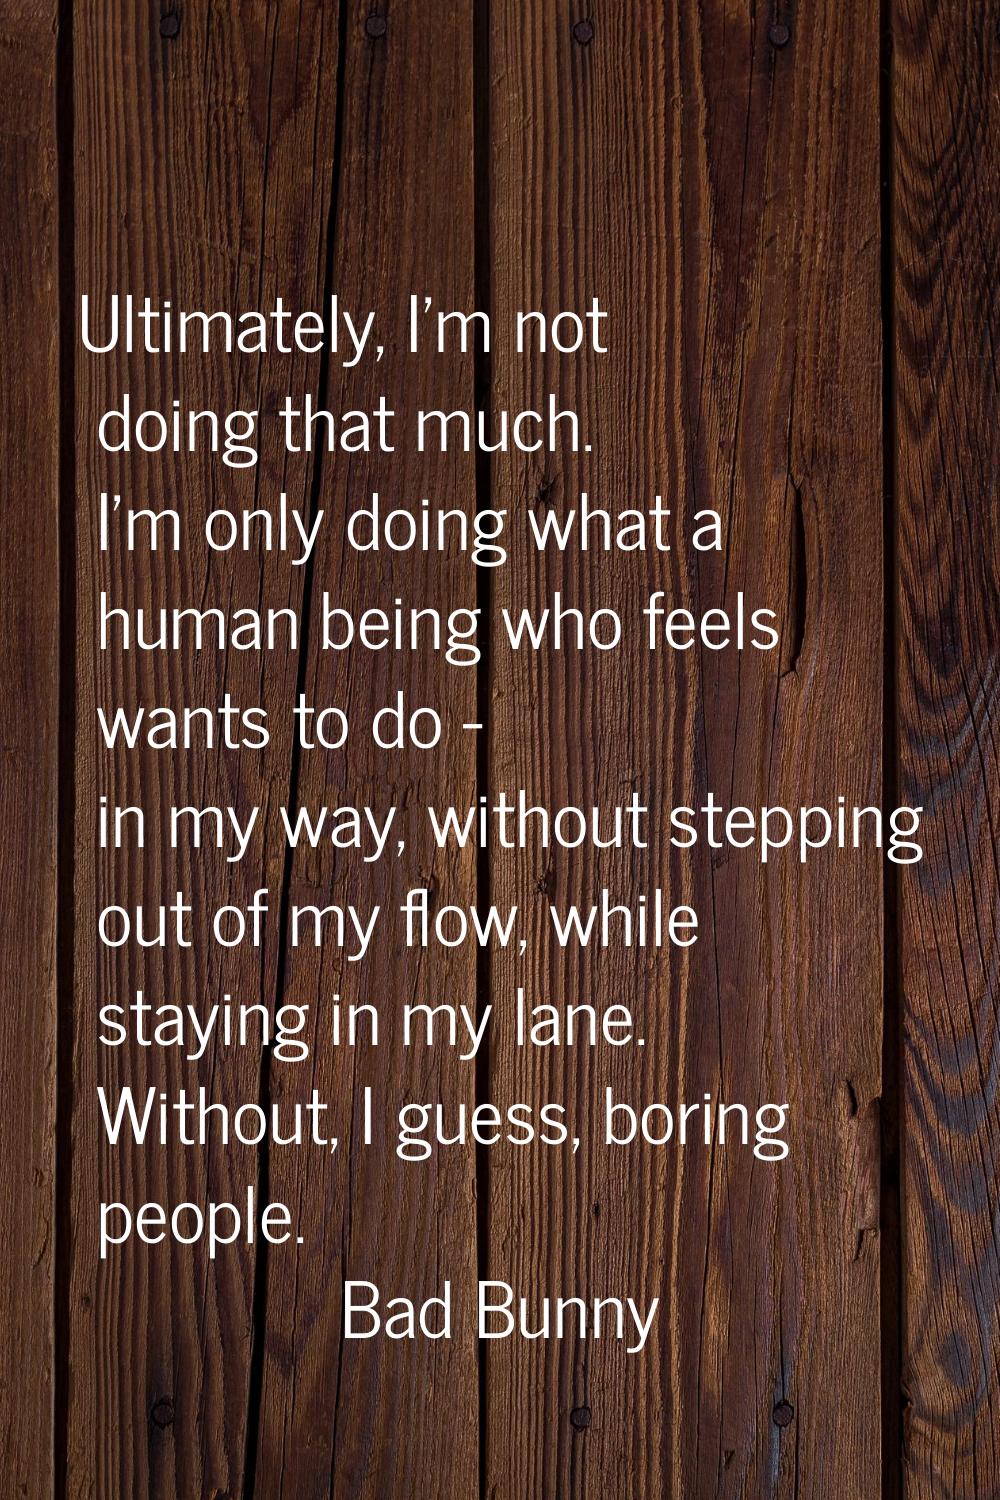 Ultimately, I'm not doing that much. I'm only doing what a human being who feels wants to do - in m